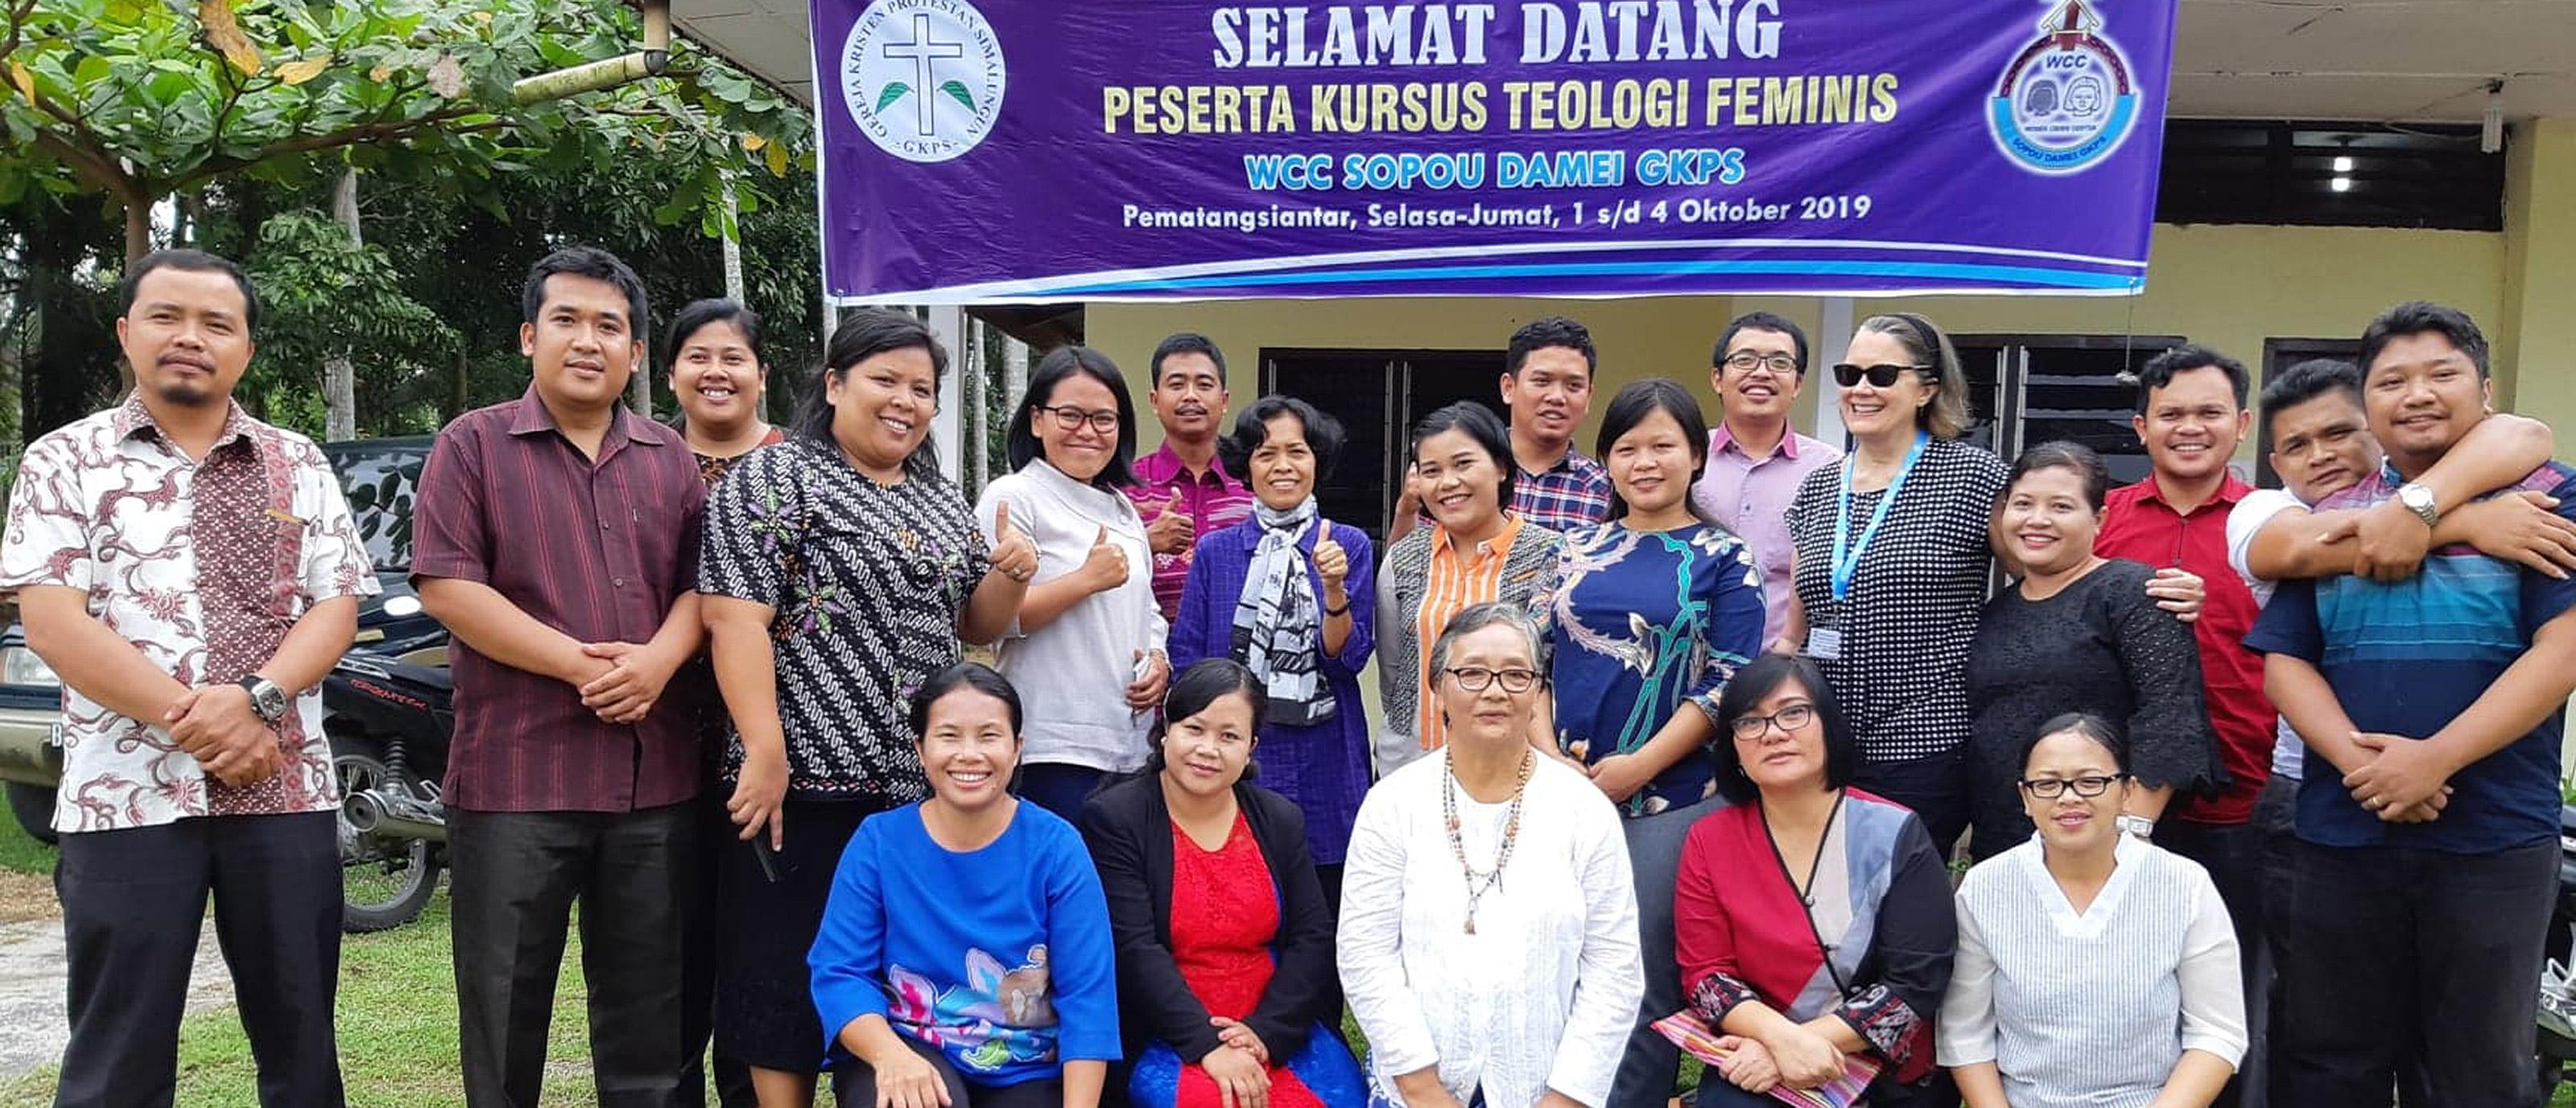 Pastors and evangelists at a crisis drop-in center, run by the Simalungun Protestant Christian Church (GKPS) in Indonesiaâs North Sumatra province. Photo: LWF/P. Hitchen